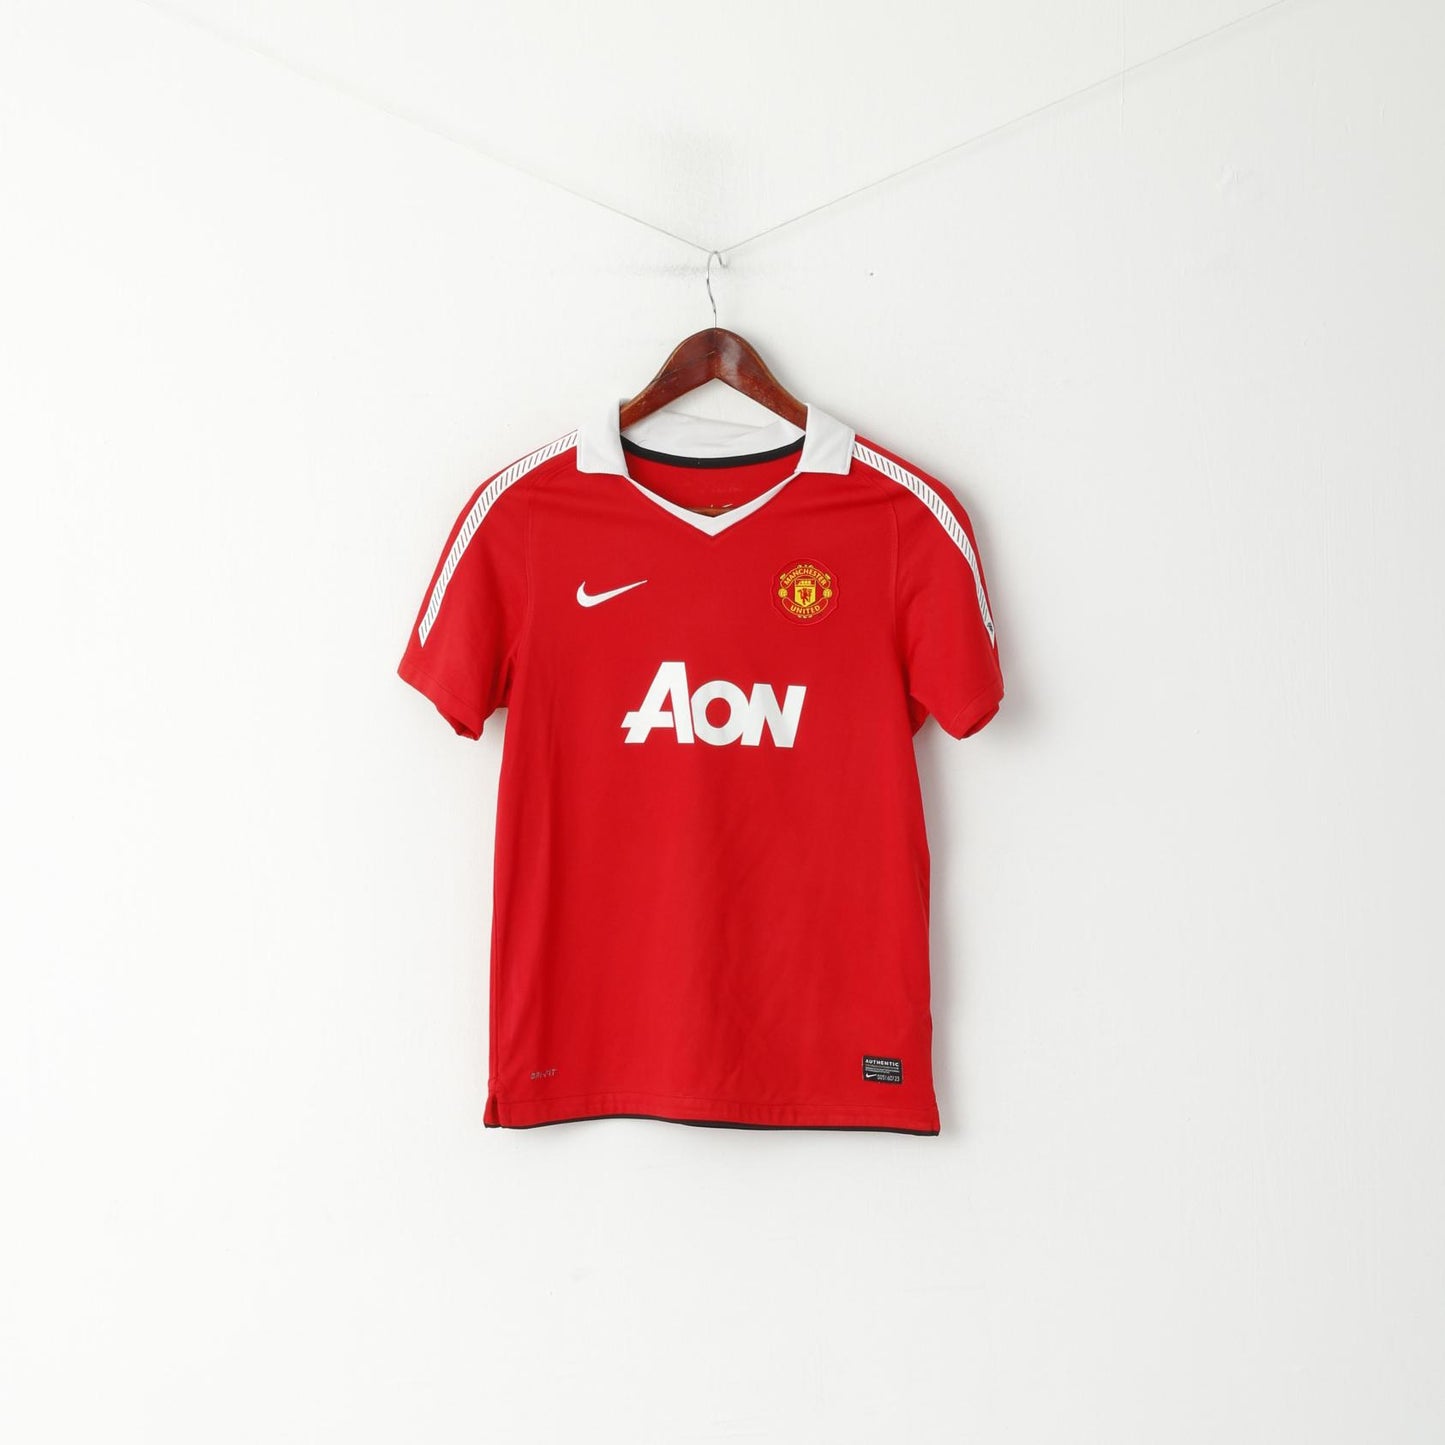 Nike Manchester United Boys 12 /13 Age 152 Polo Shirt Red Football Jersey Top